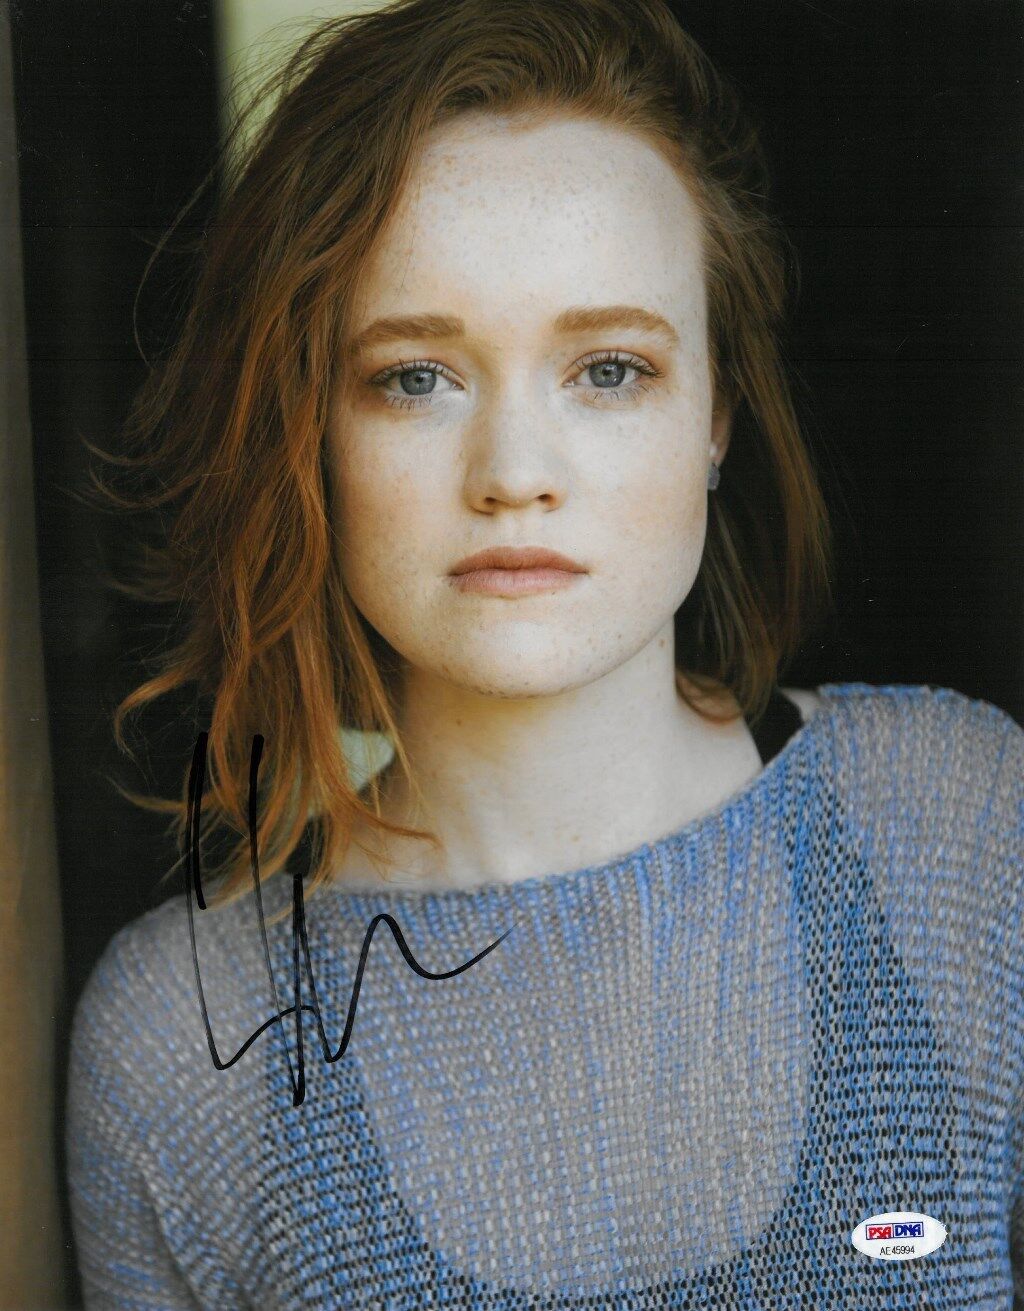 Liv Hewson Signed Santa Clarita Diet Autographed 11x14 Photo Poster painting PSA/DNA #AE45994